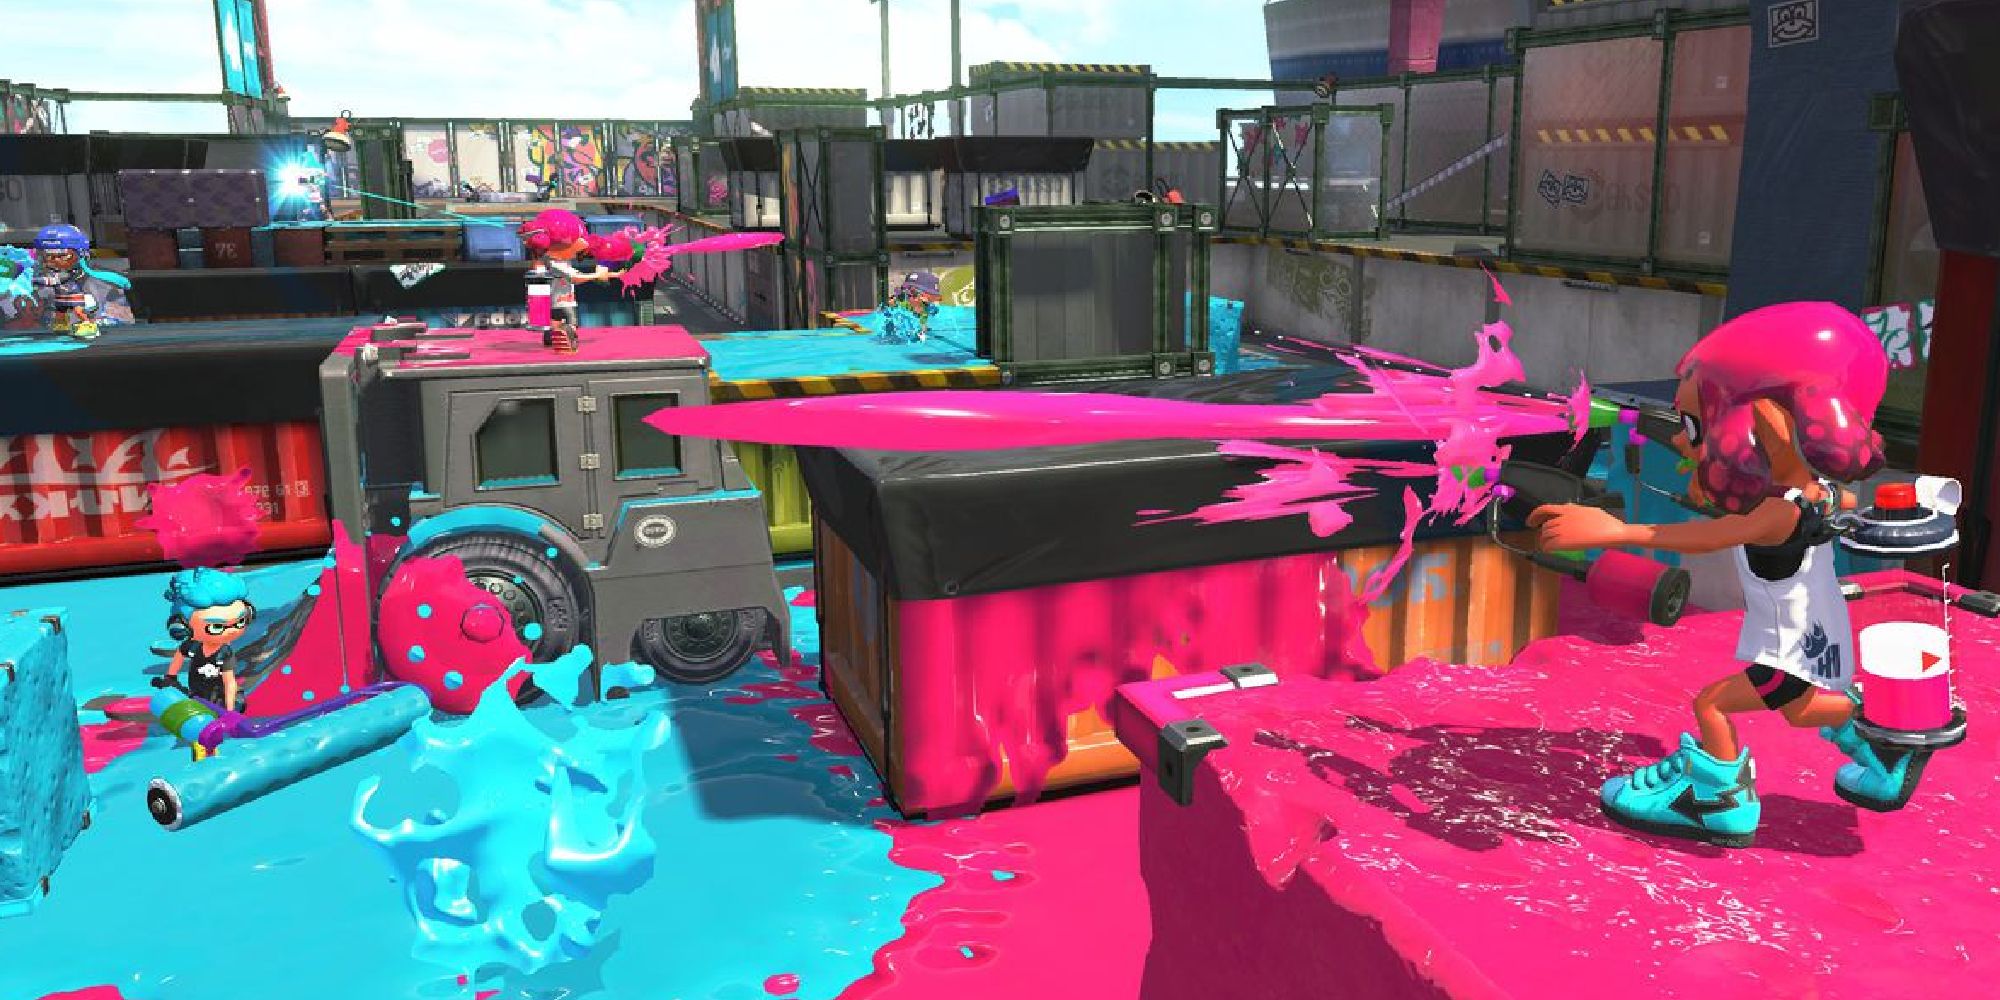 A pink Inkling on a platform shooting downwards at a blue Inkling with a Paint roller